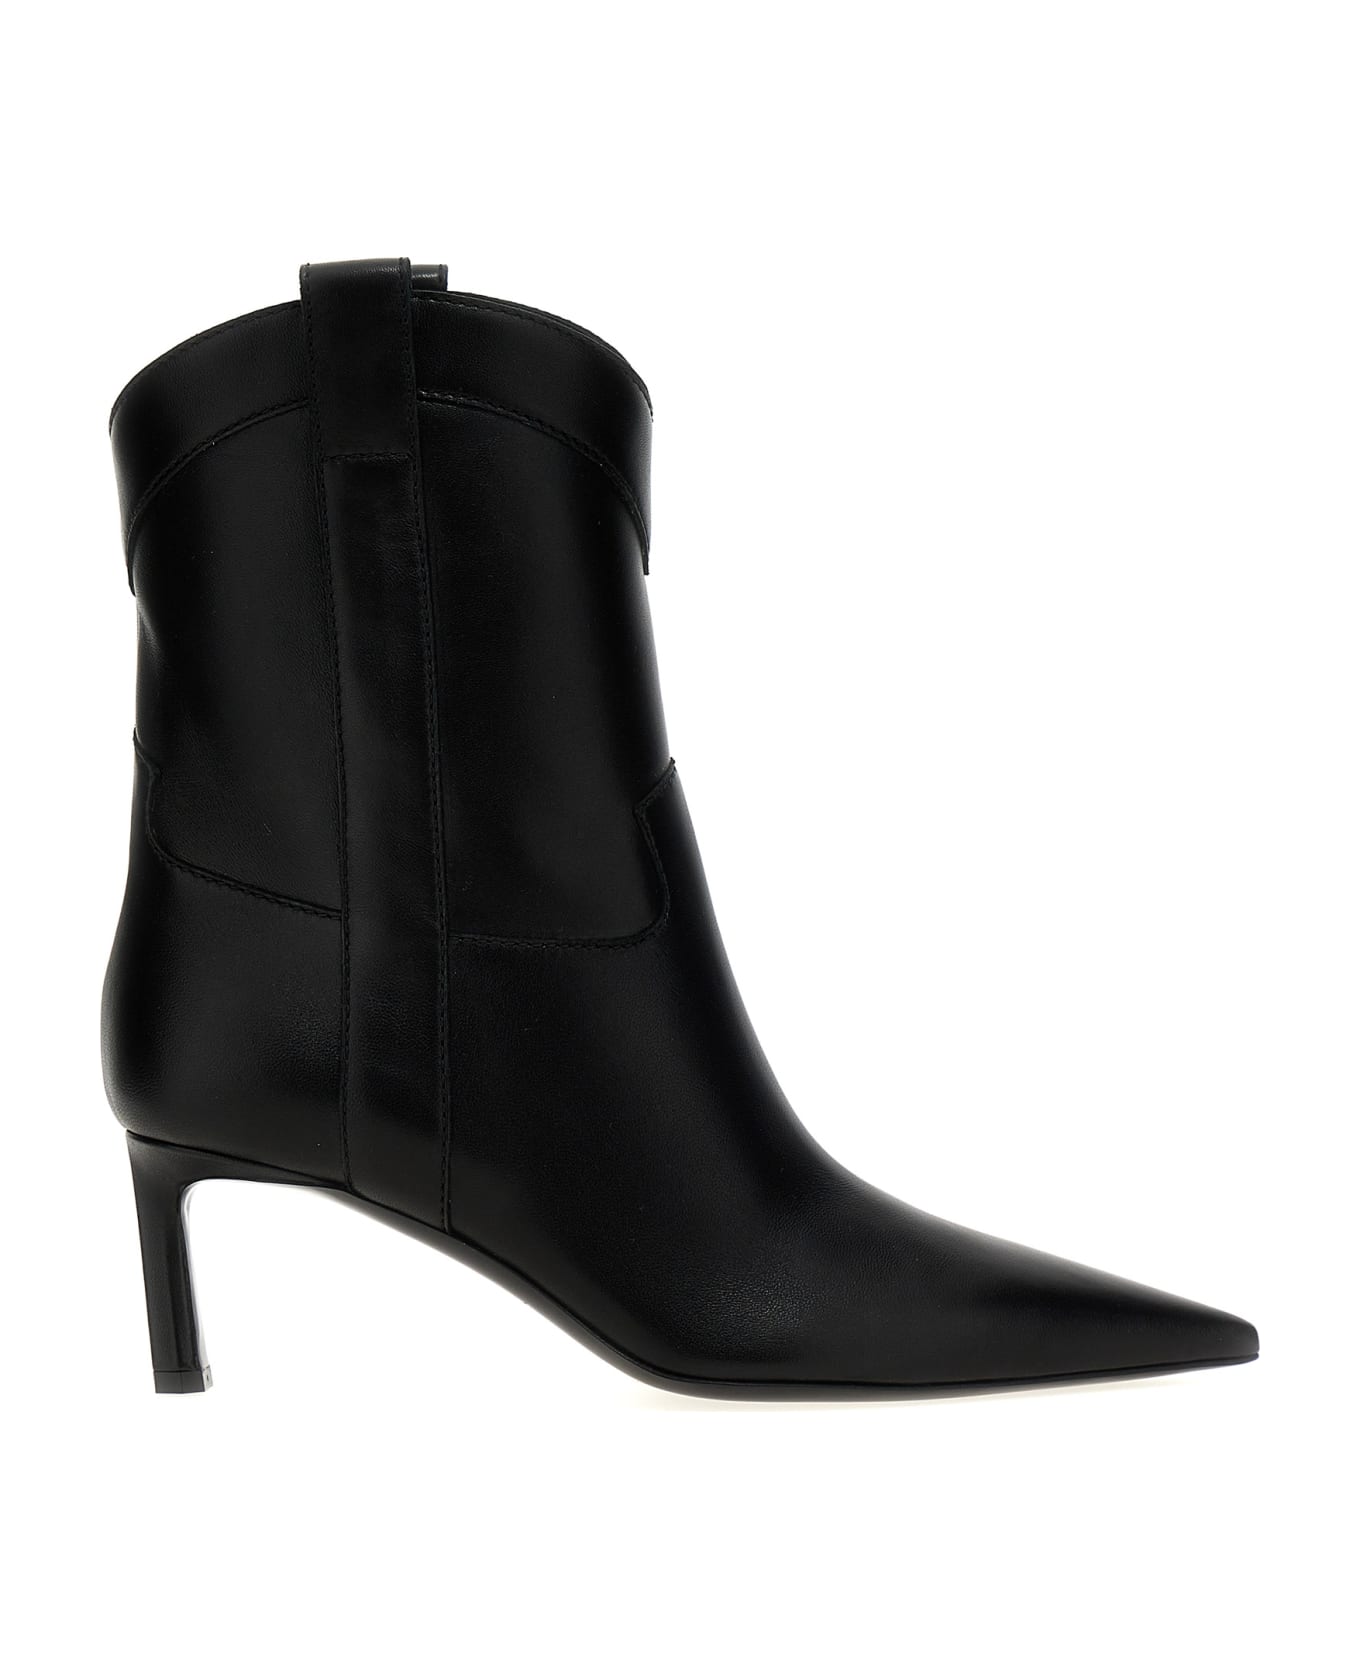 Sergio Rossi 'guadalupe' Ankle Boots - Black  